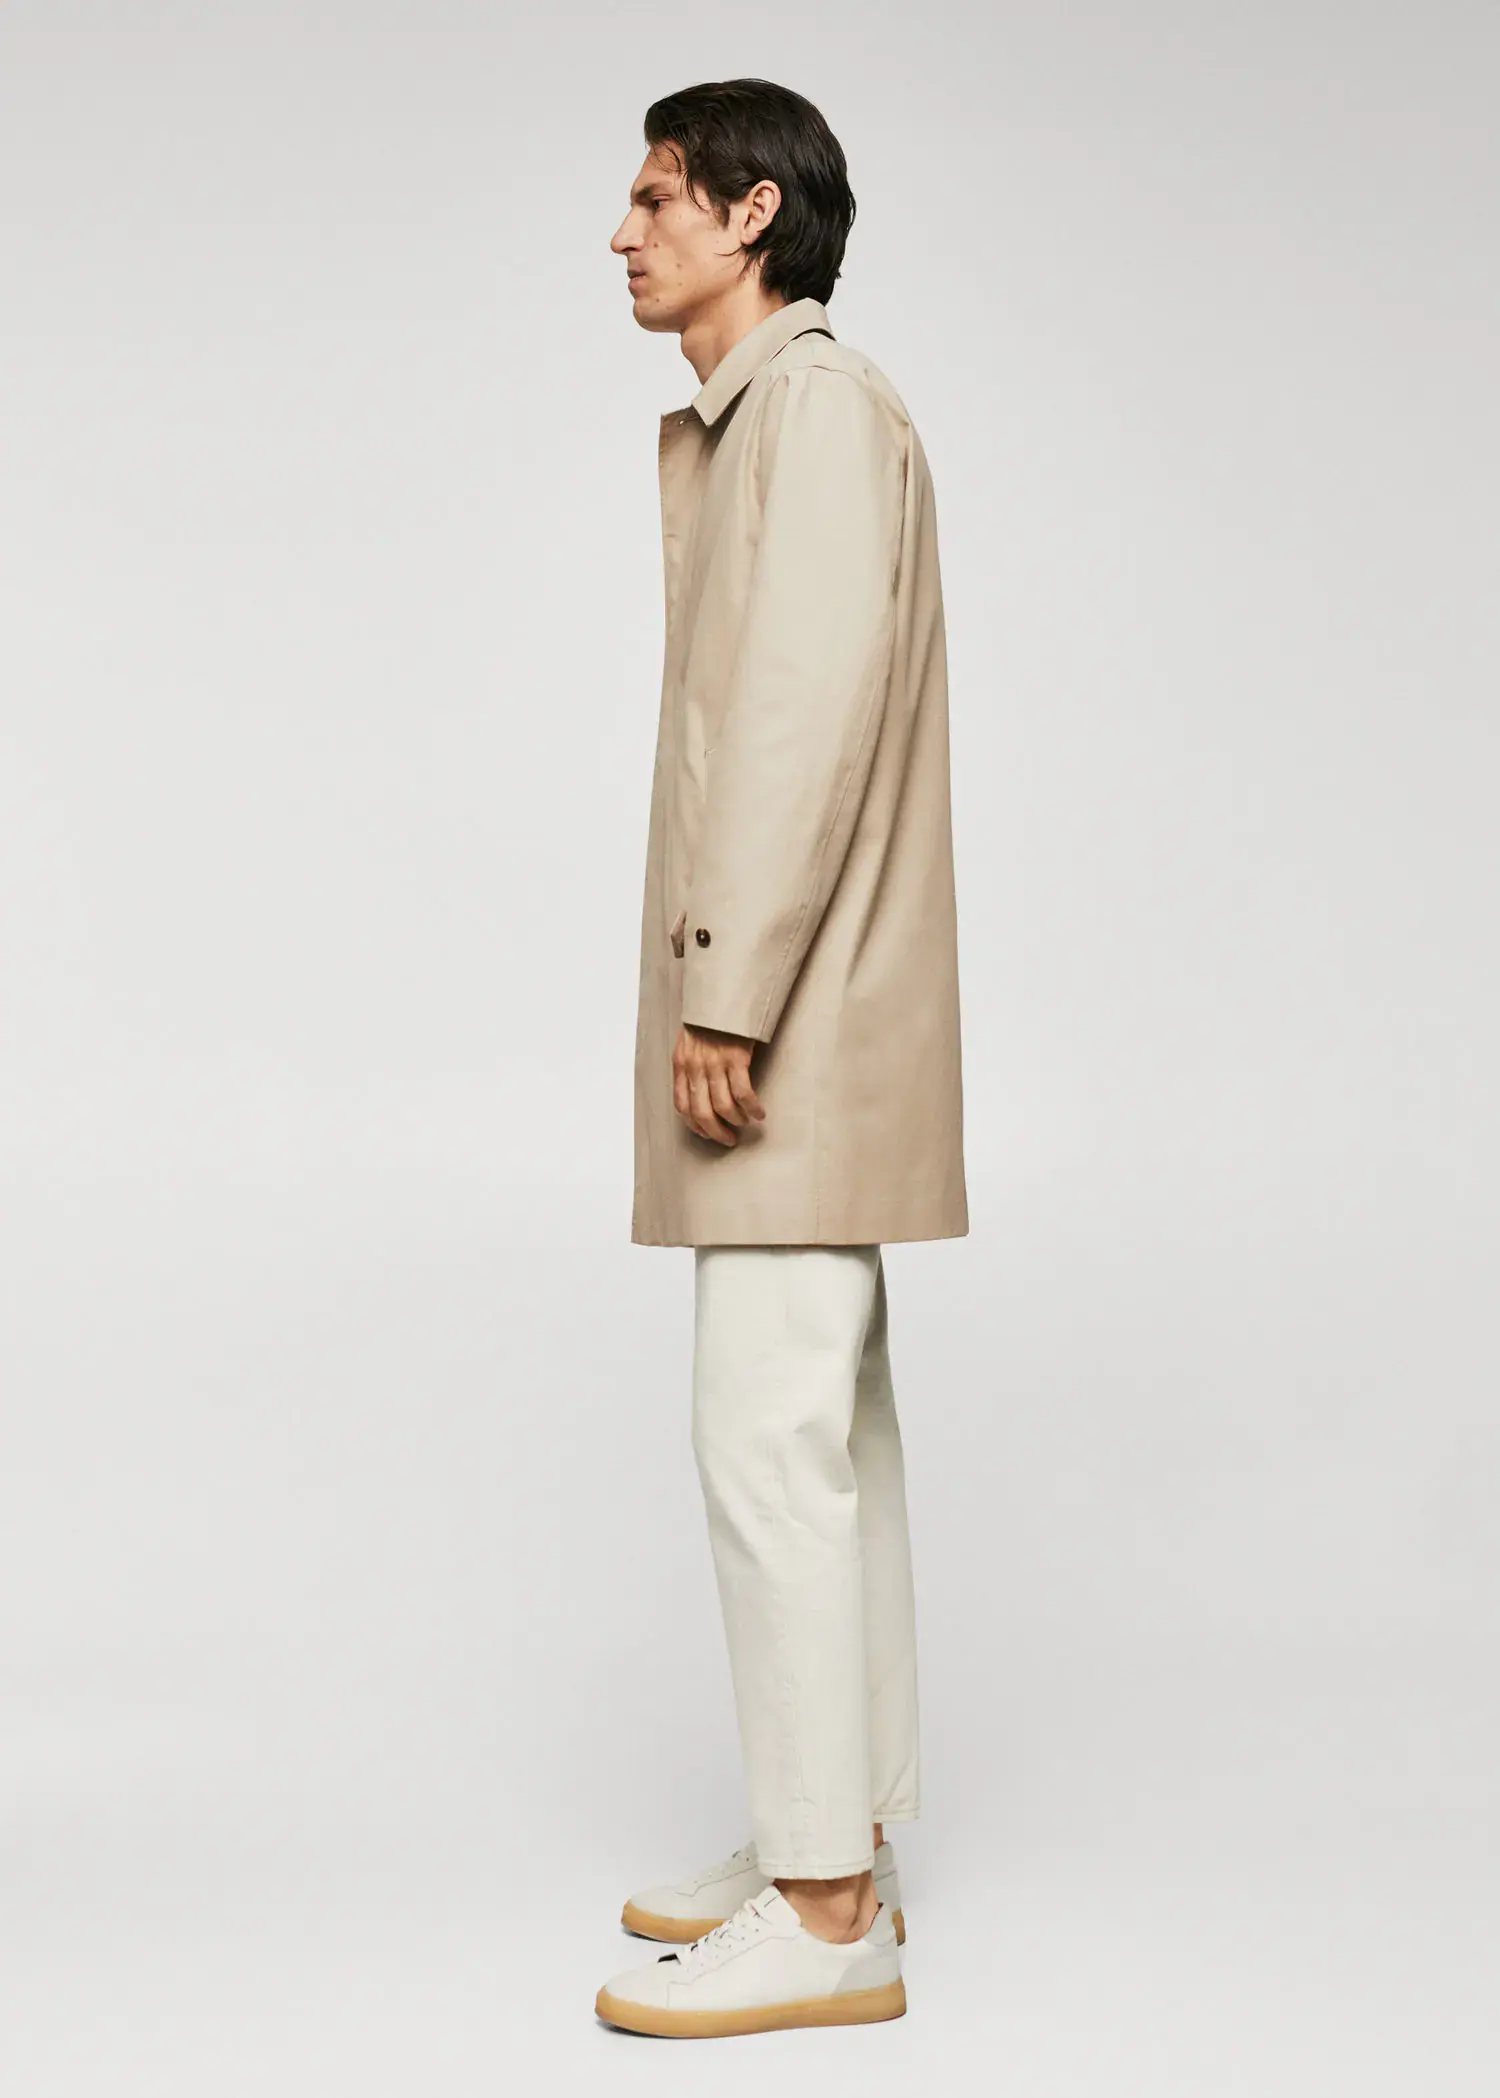 Mango Water-repellent cotton trench coat. a man wearing a tan coat and white pants. 